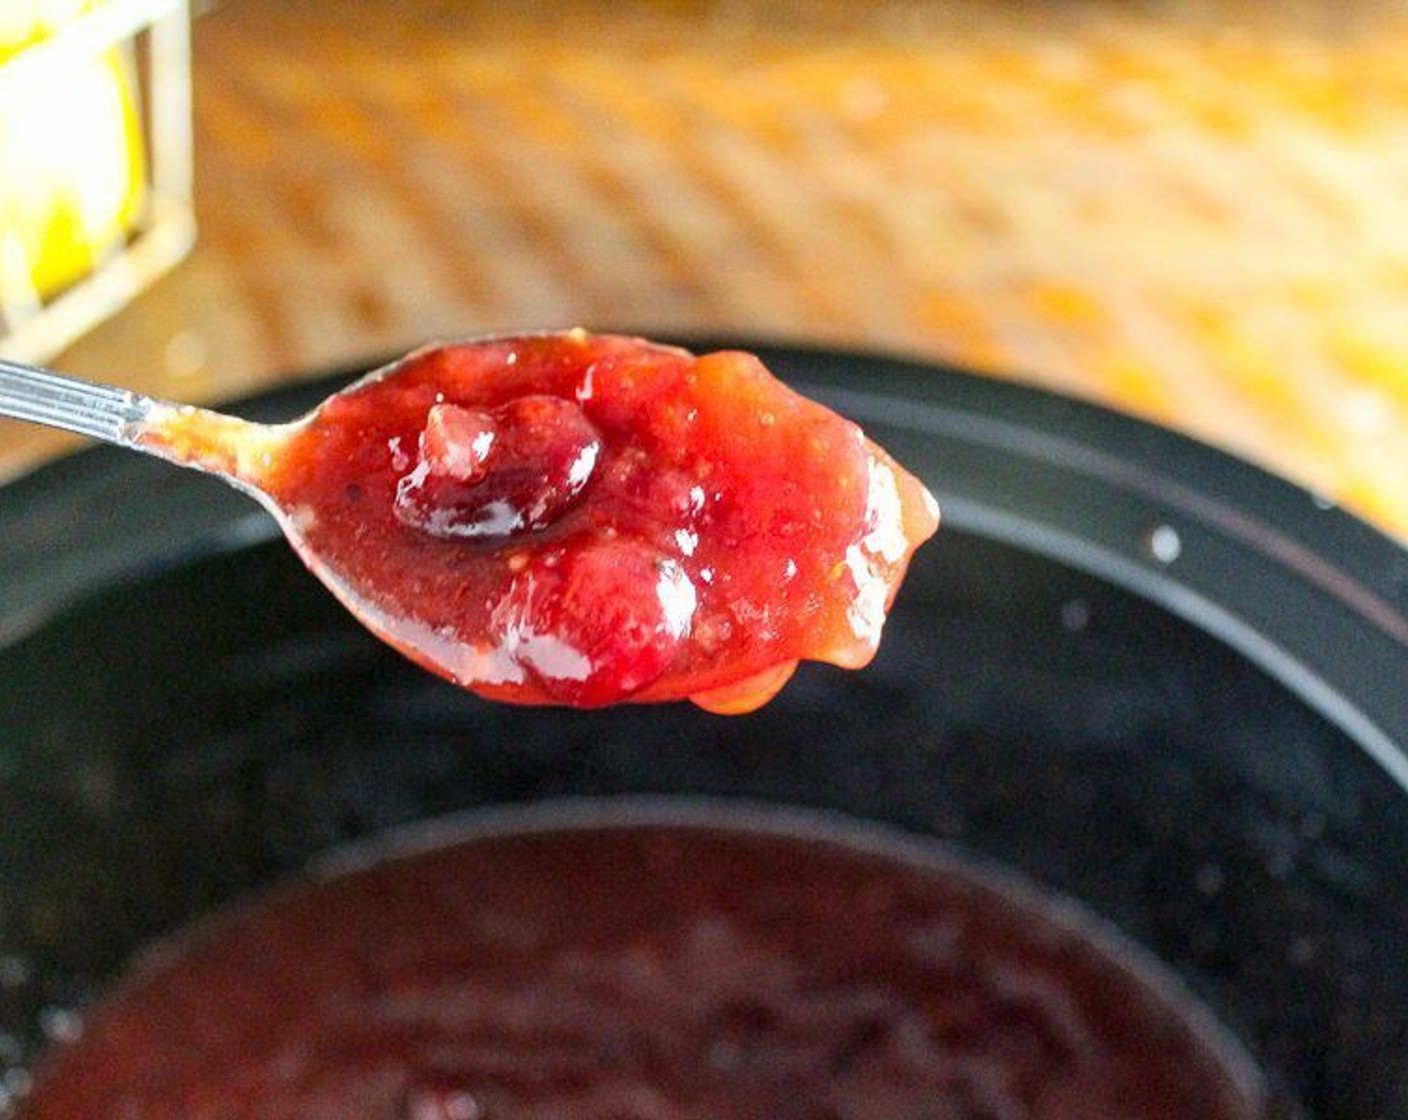 step 6 In a crockpot, whisk together the Cranberry Sauce (1 cup), Whole Berry Cranberry Sauce (1 cup), Chili Sauce (12 oz) and Sweet Chili Sauce (1 cup).